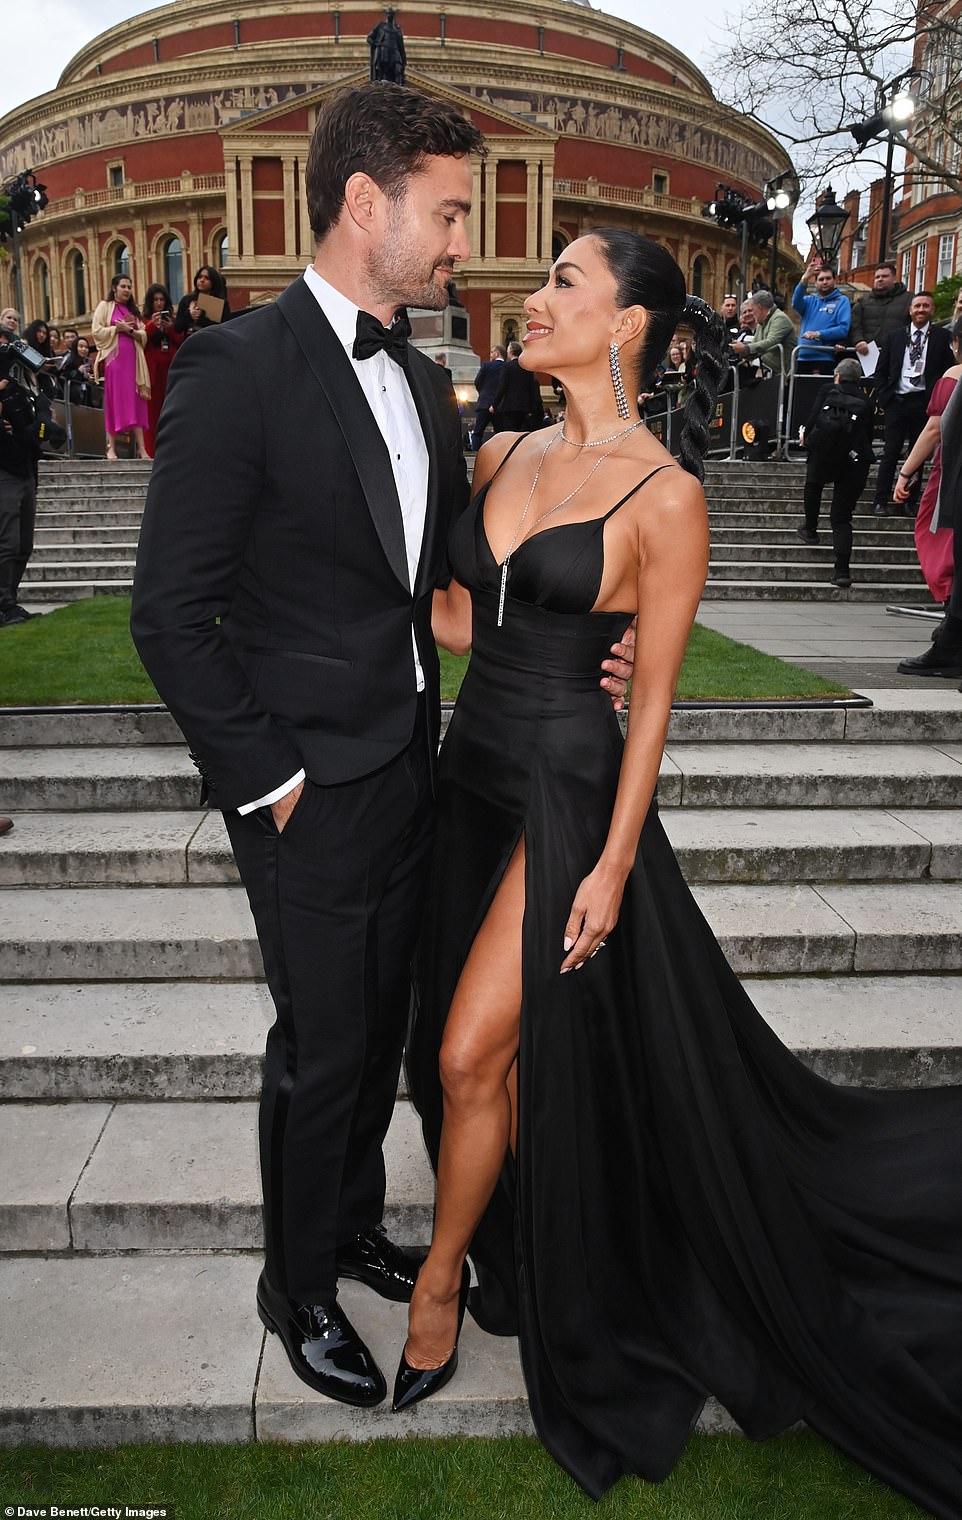 Her raven black hair was styled in a neat plait and she was joined by her fiancé Thom Evans, who looked handsome in a black tuxedo and bow tie